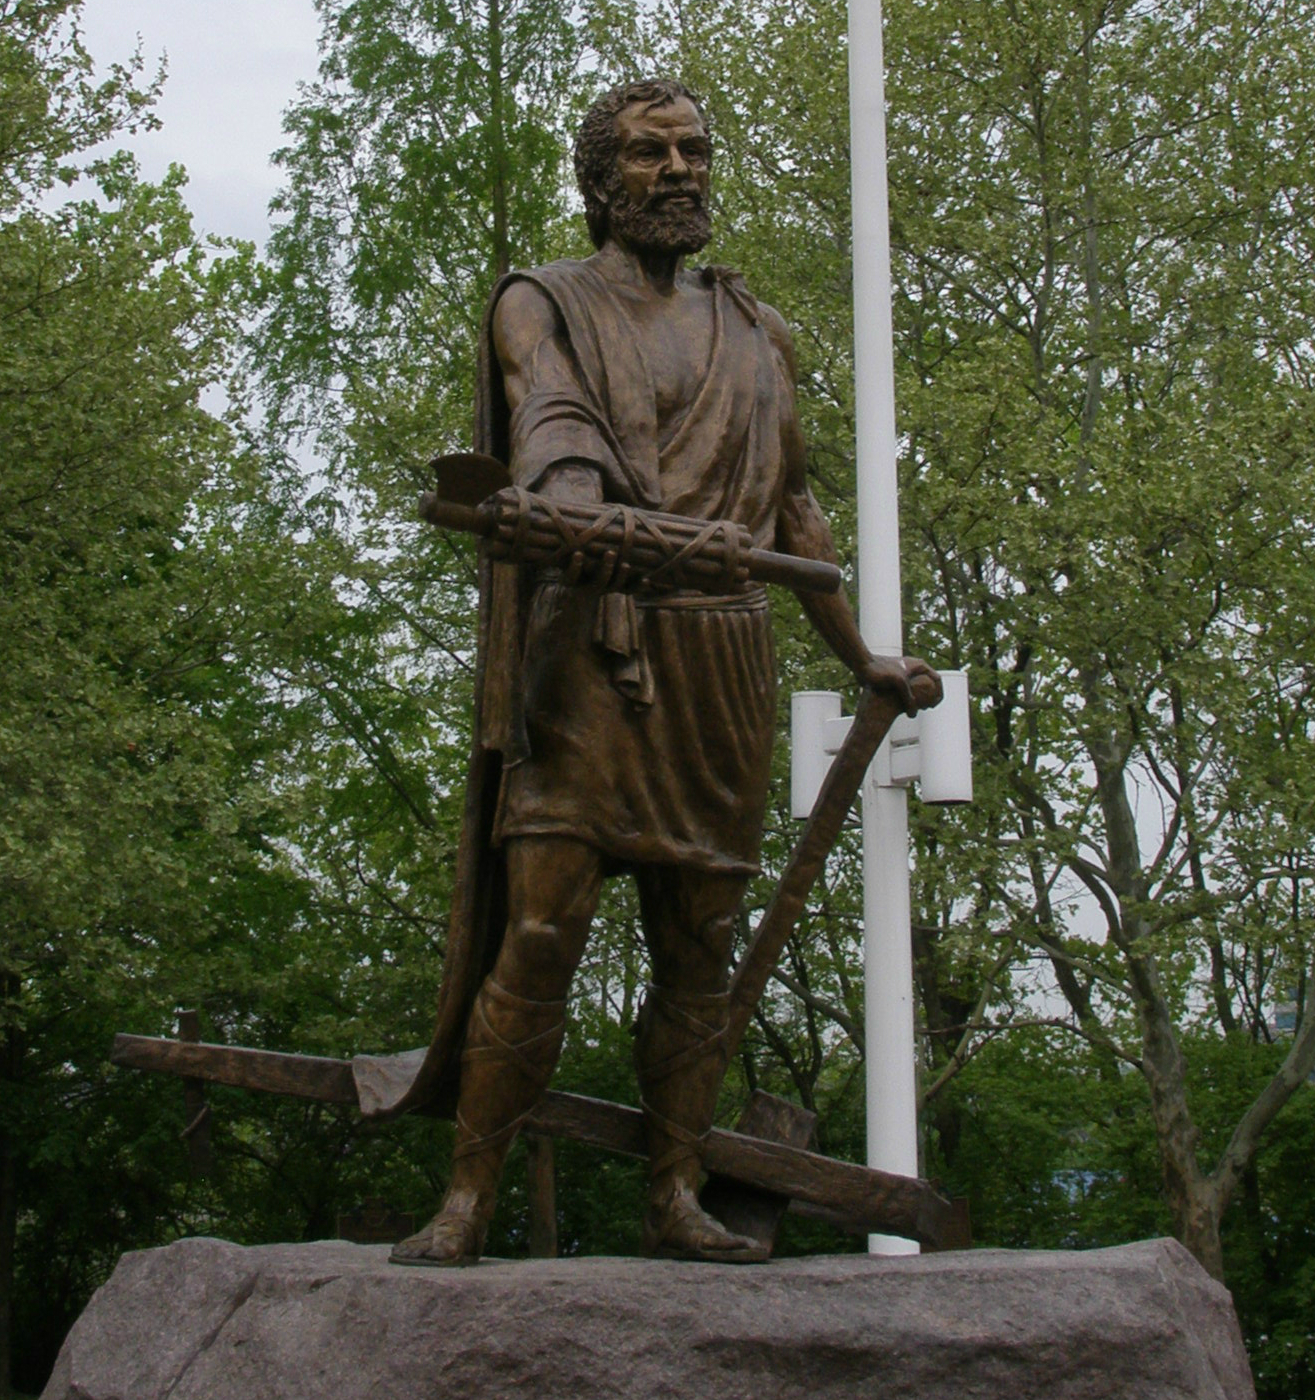 Cincinnatus at his plowBy Chris Light - Wikicommons, Public Domain, https://commons.wikimedia.org/w/index.php?curid=52779346